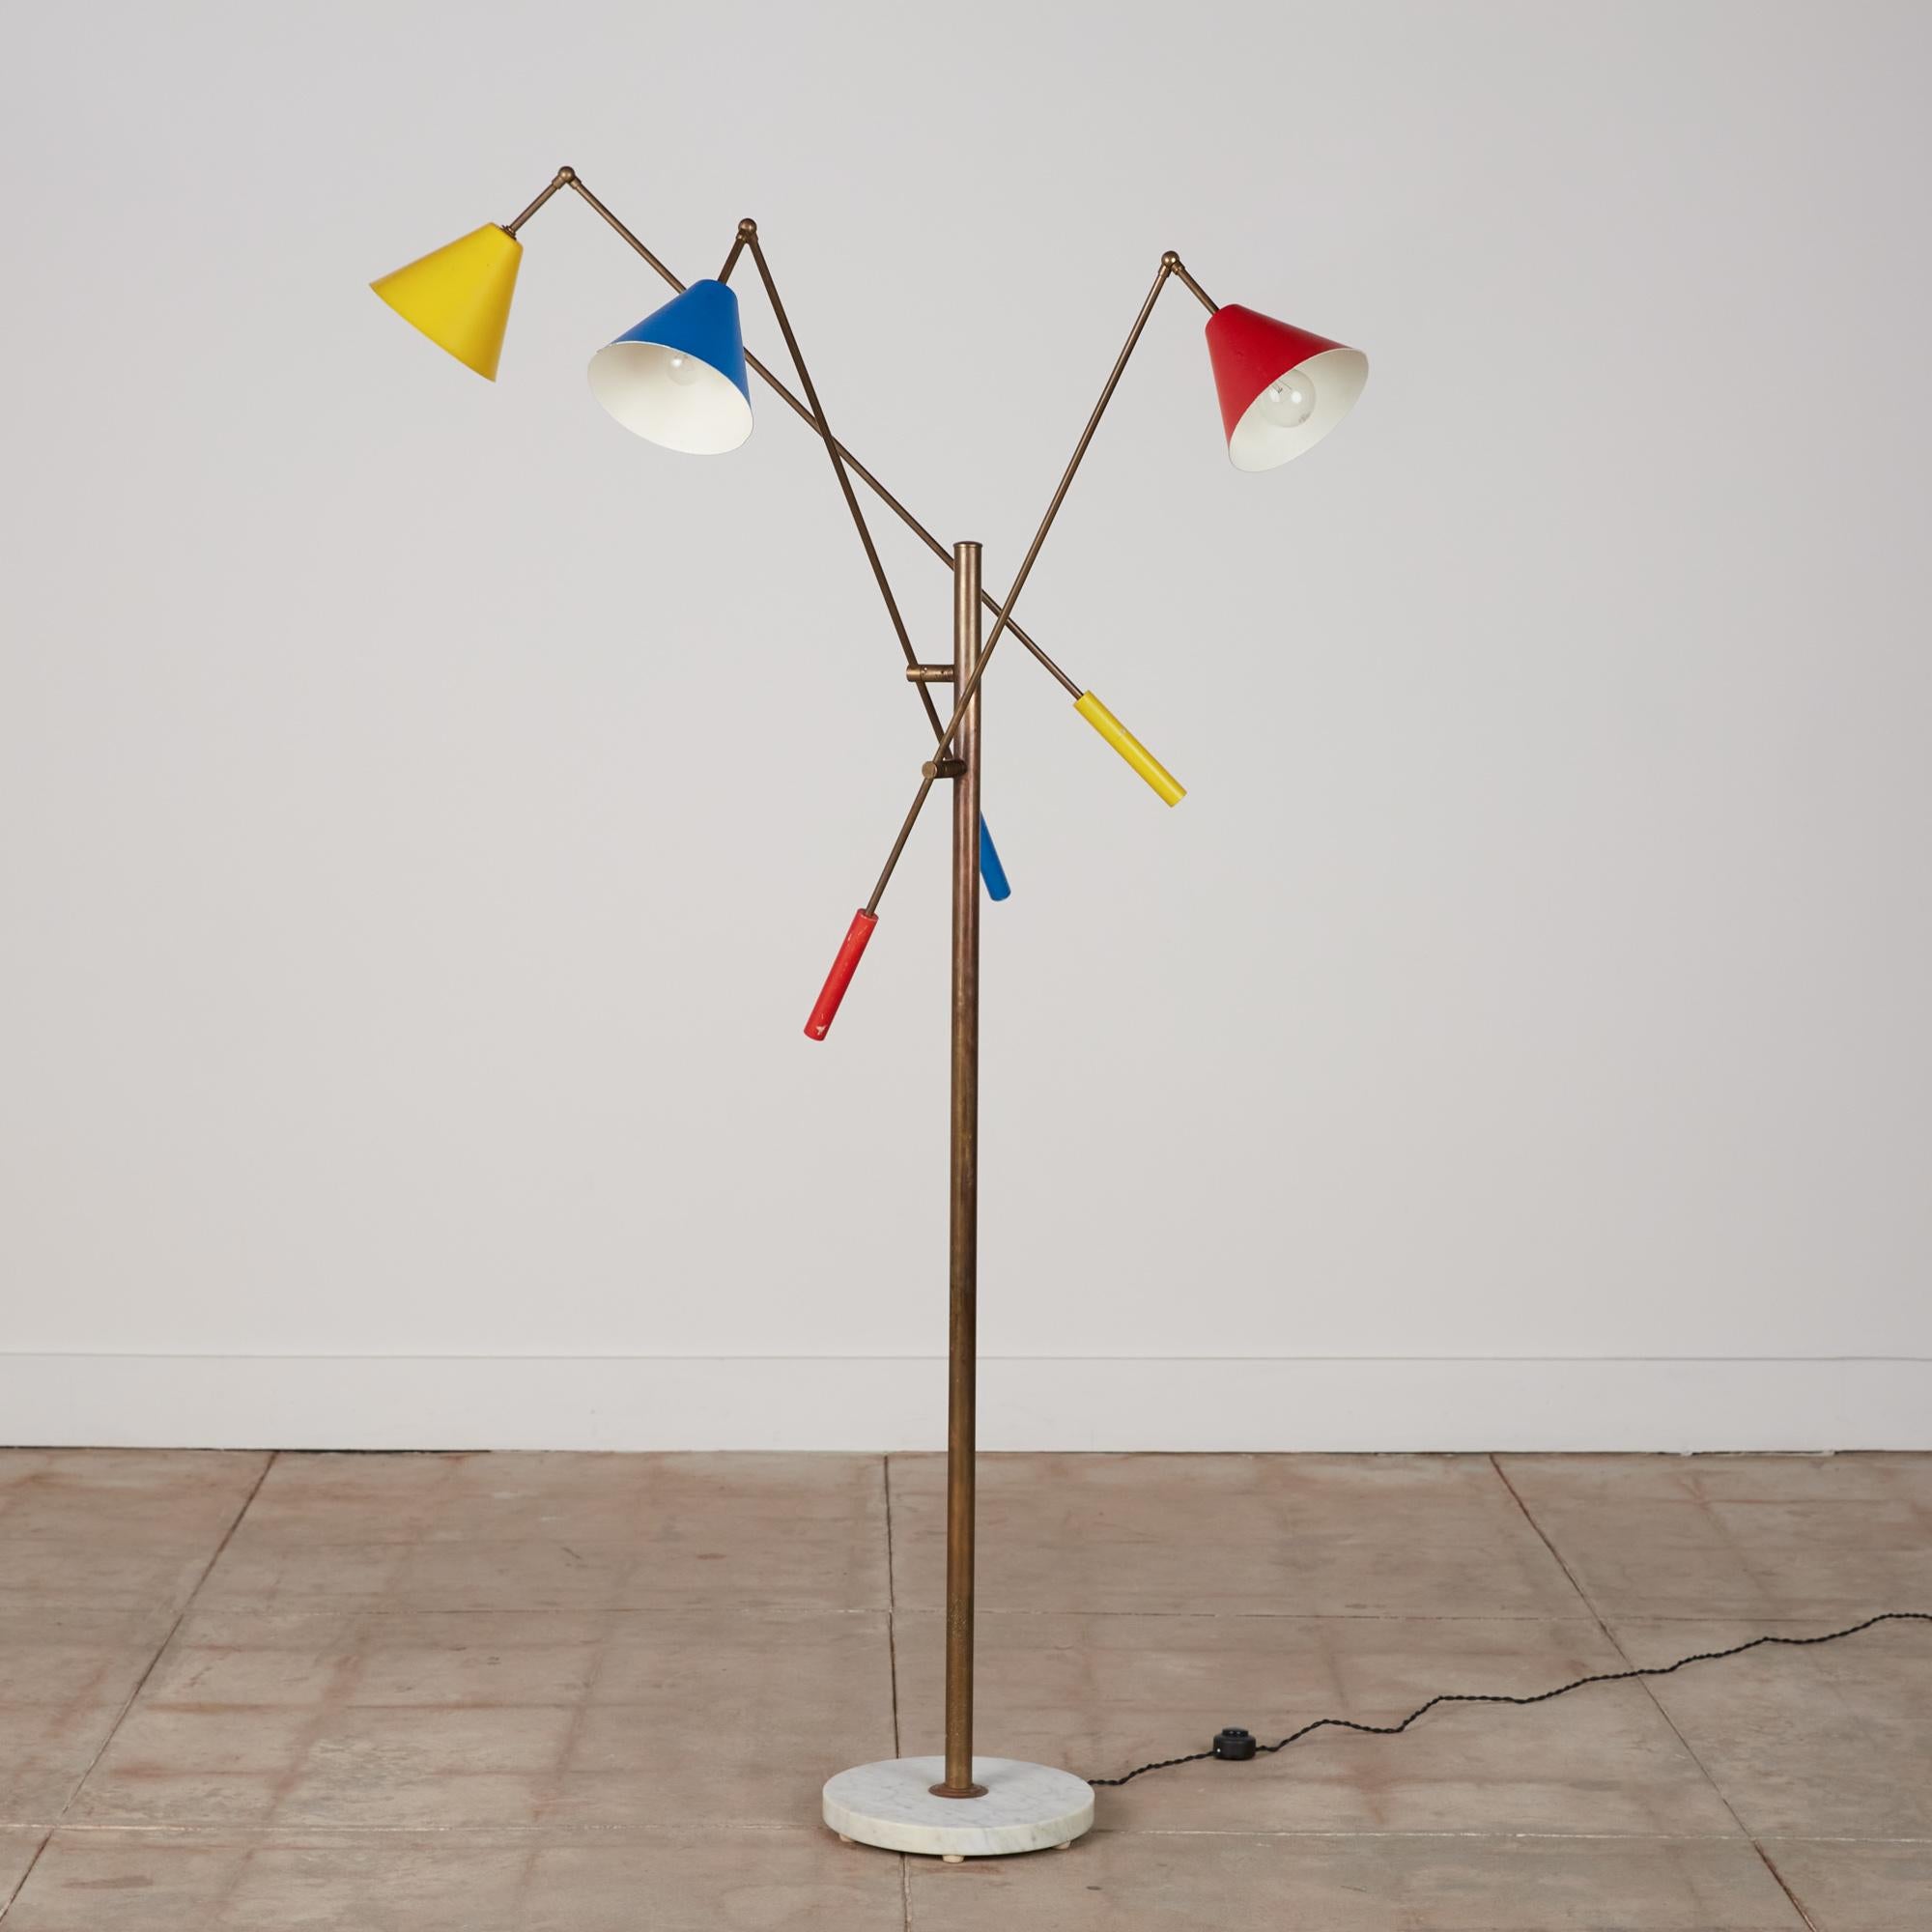 Angelo Lelli style “Triennale” floor lamp, Italy, circa 1960s. This design was originally designed by Angelo Lelli in the 1950s and produced by Arredoluce from the 1950s-1980s. The lamp features a brass stem and three brass arms with a circular